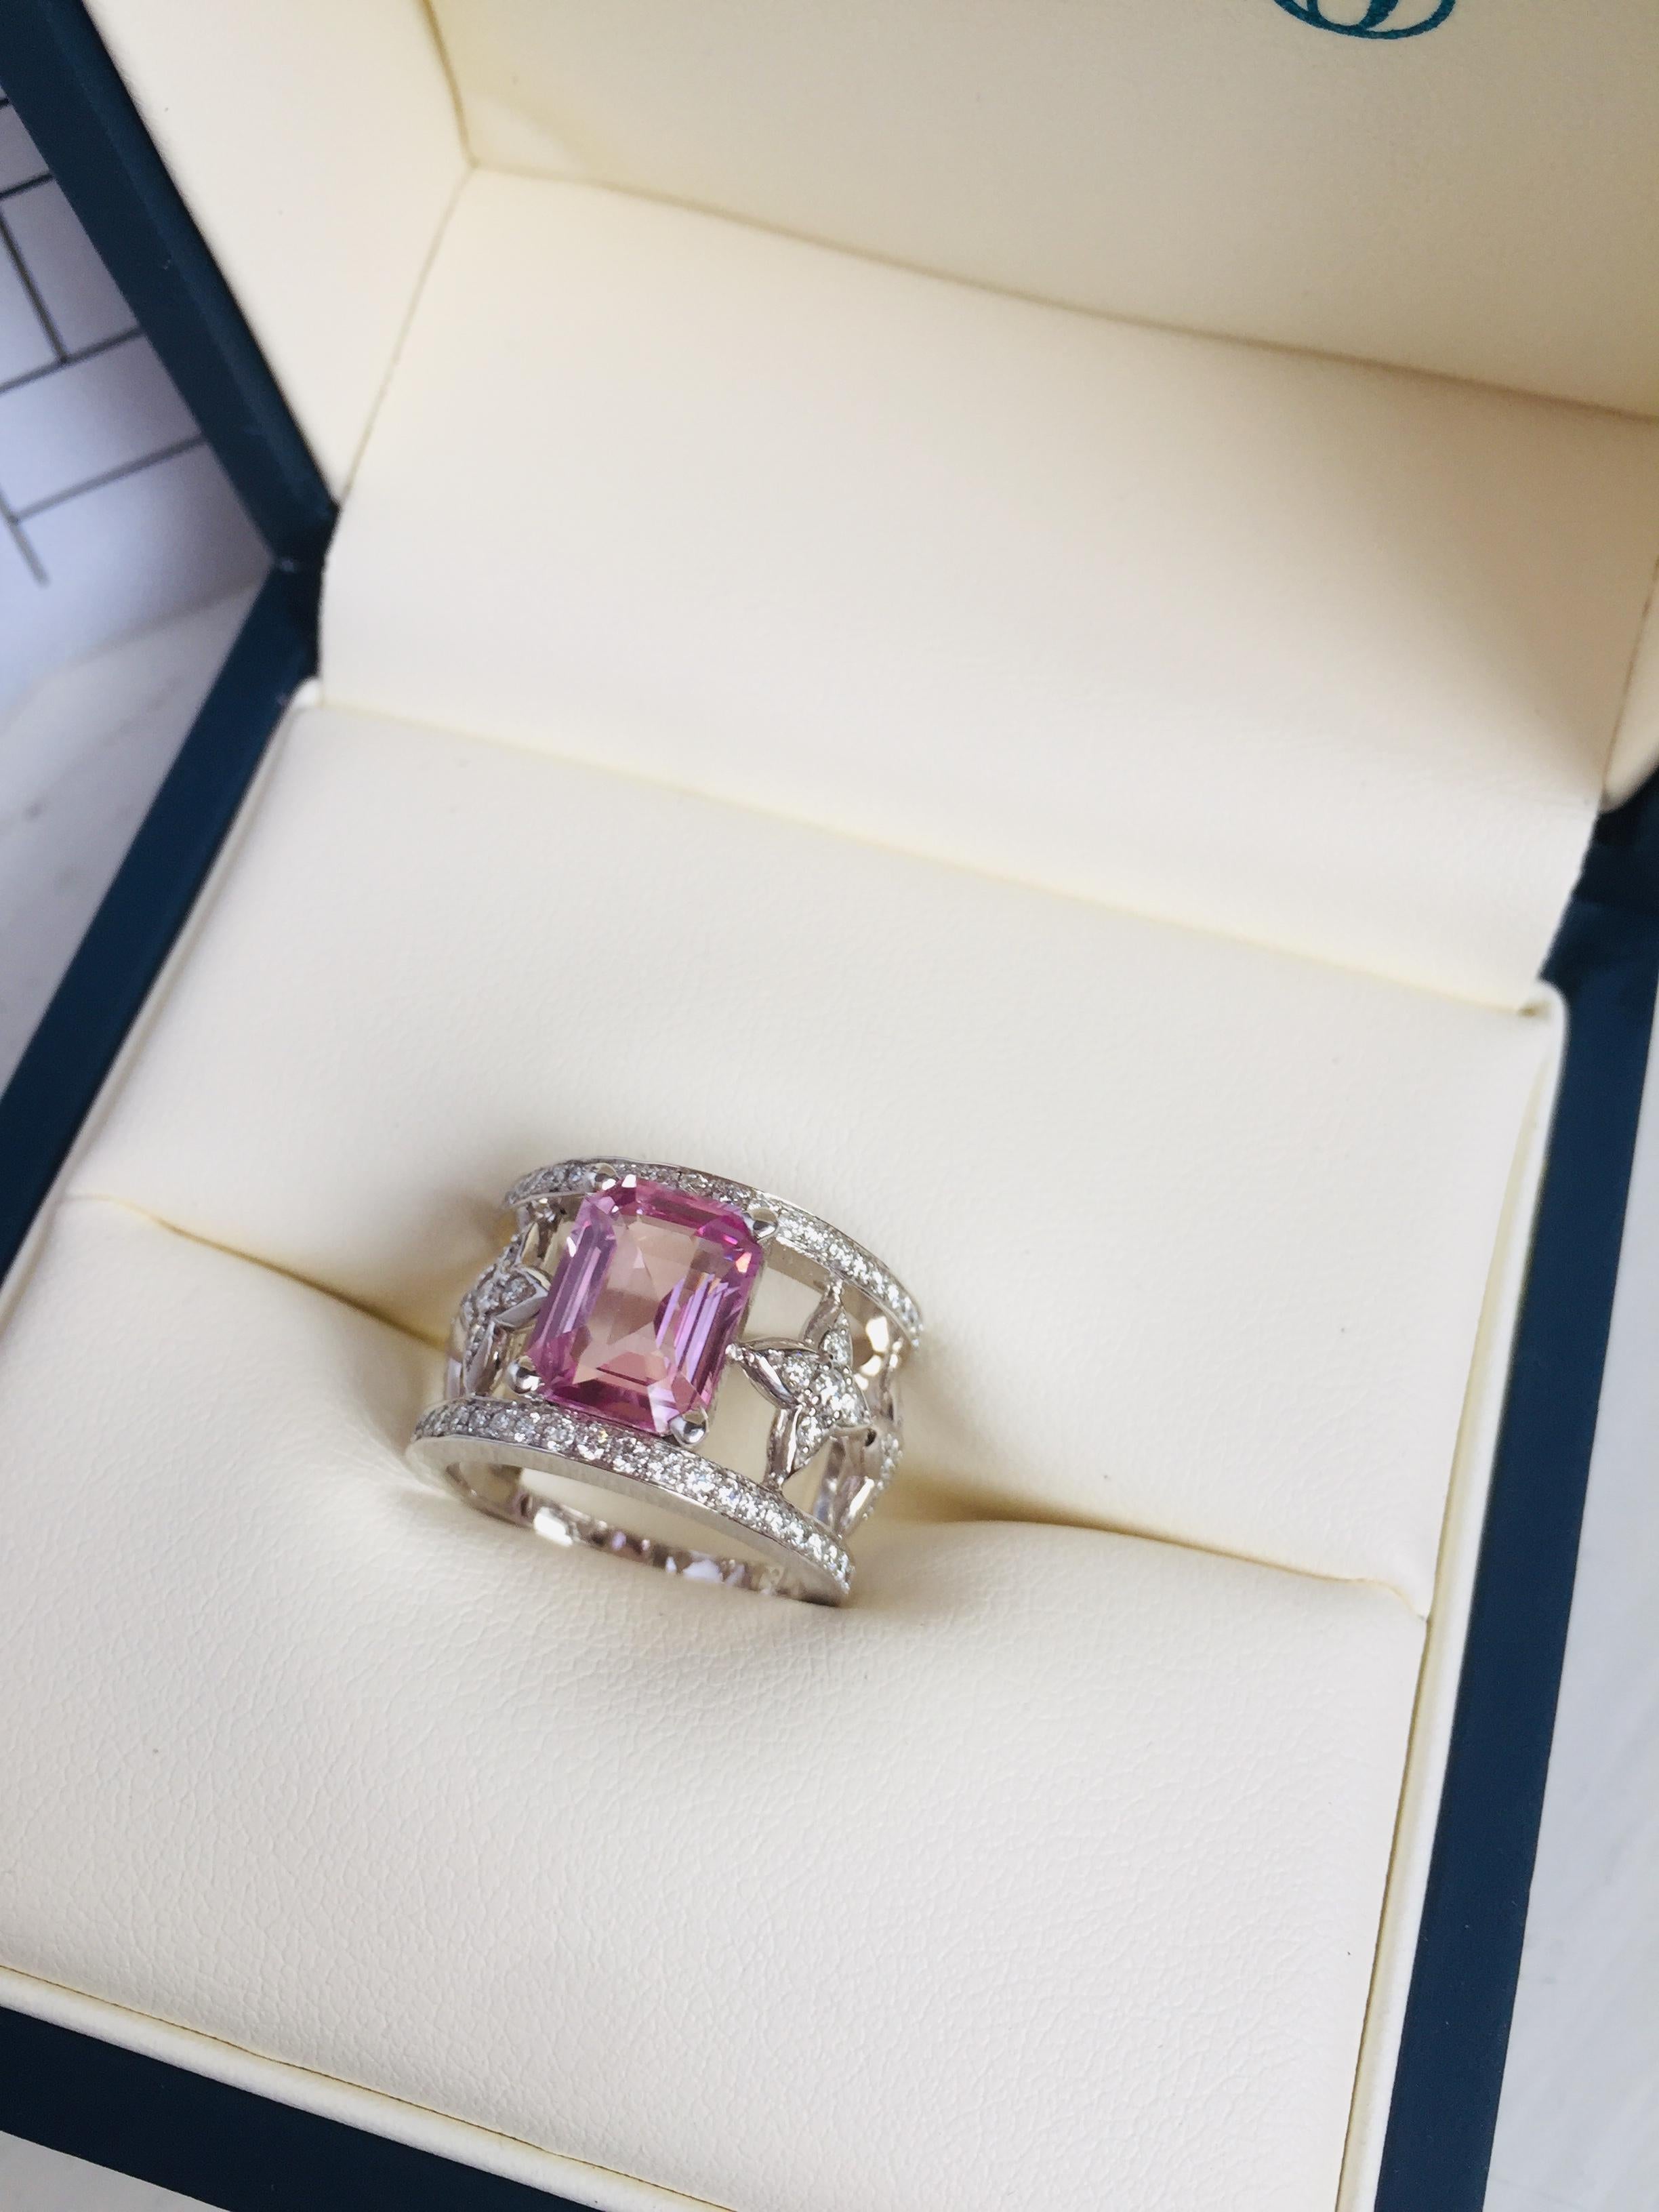 JdJ Couture Emerald Cut Pink Sapphire and Diamond Ring in 18 Karat White Gold 4